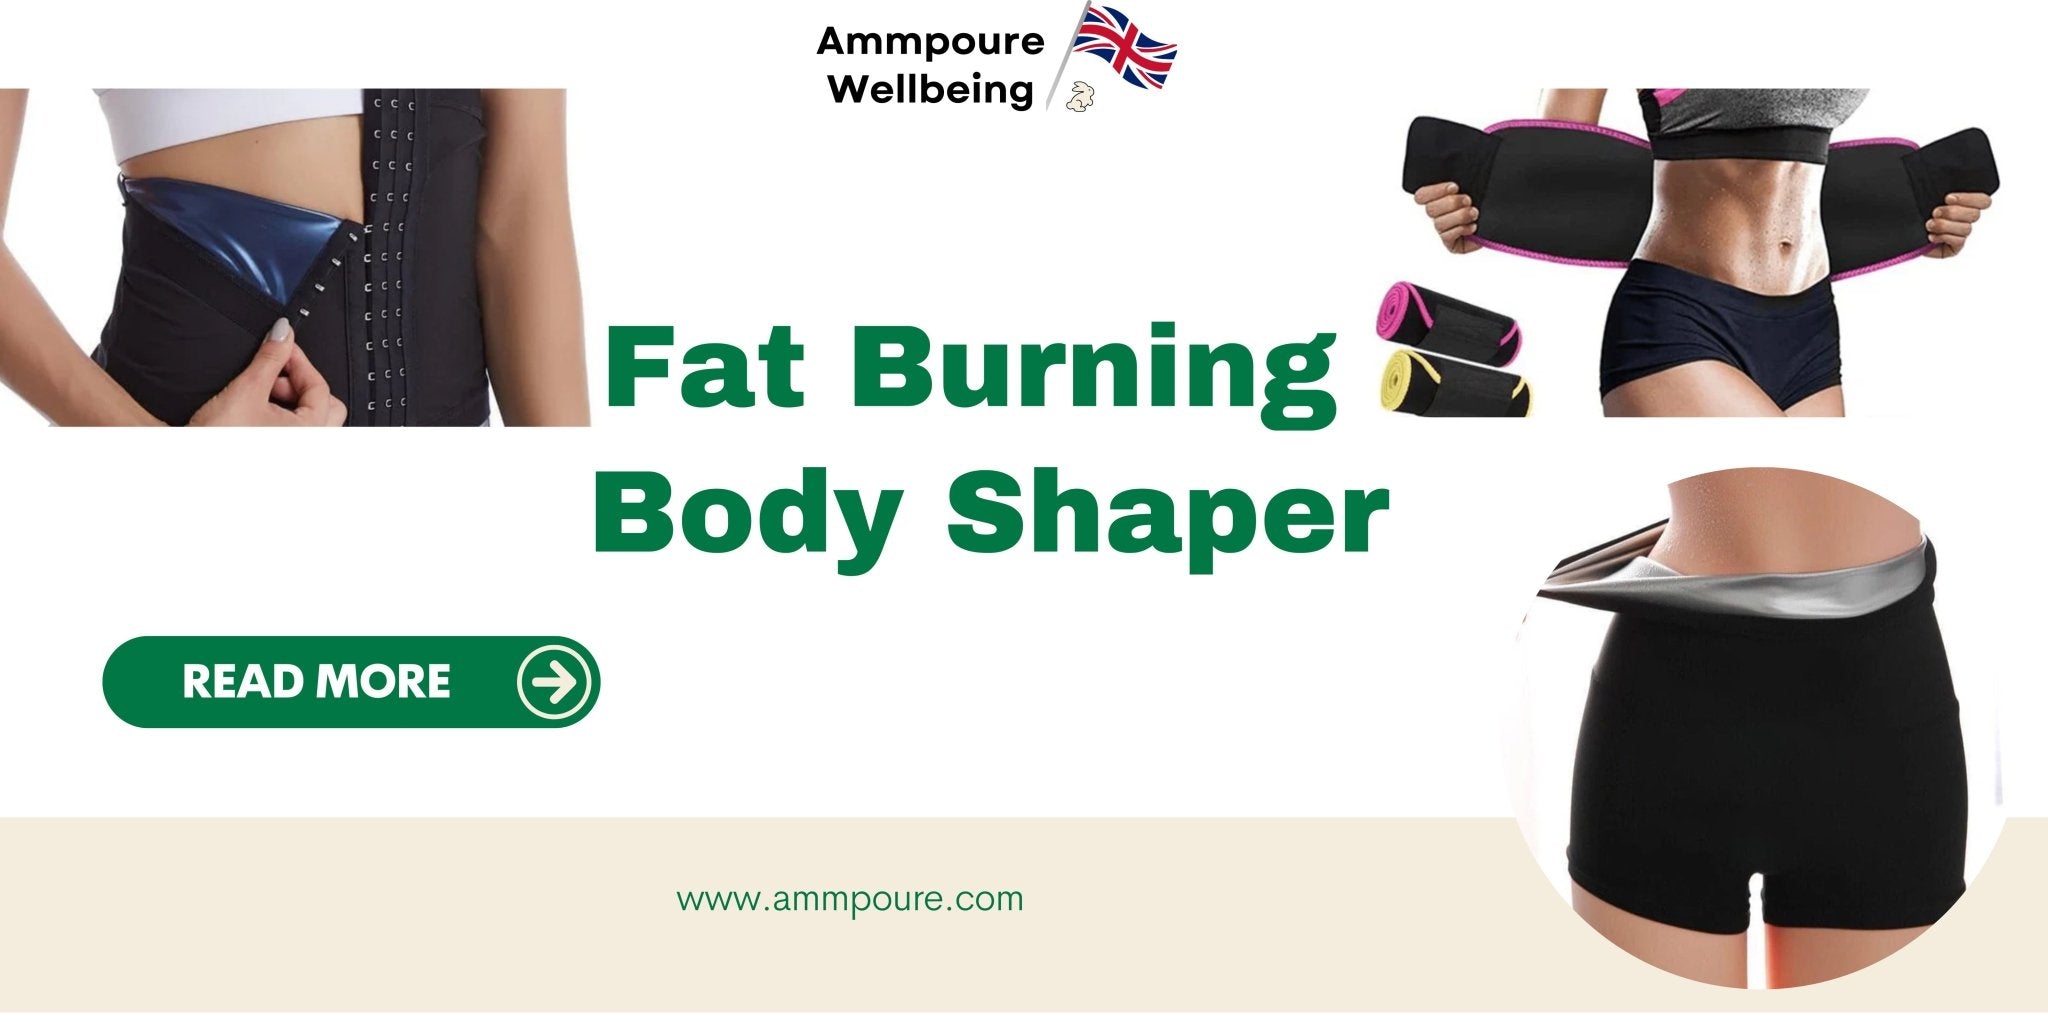 The Ultimate Guide to Fat Burning Body Shaper Products: Transform Your Fitness Journey with Ammpoure - Ammpoure Wellbeing